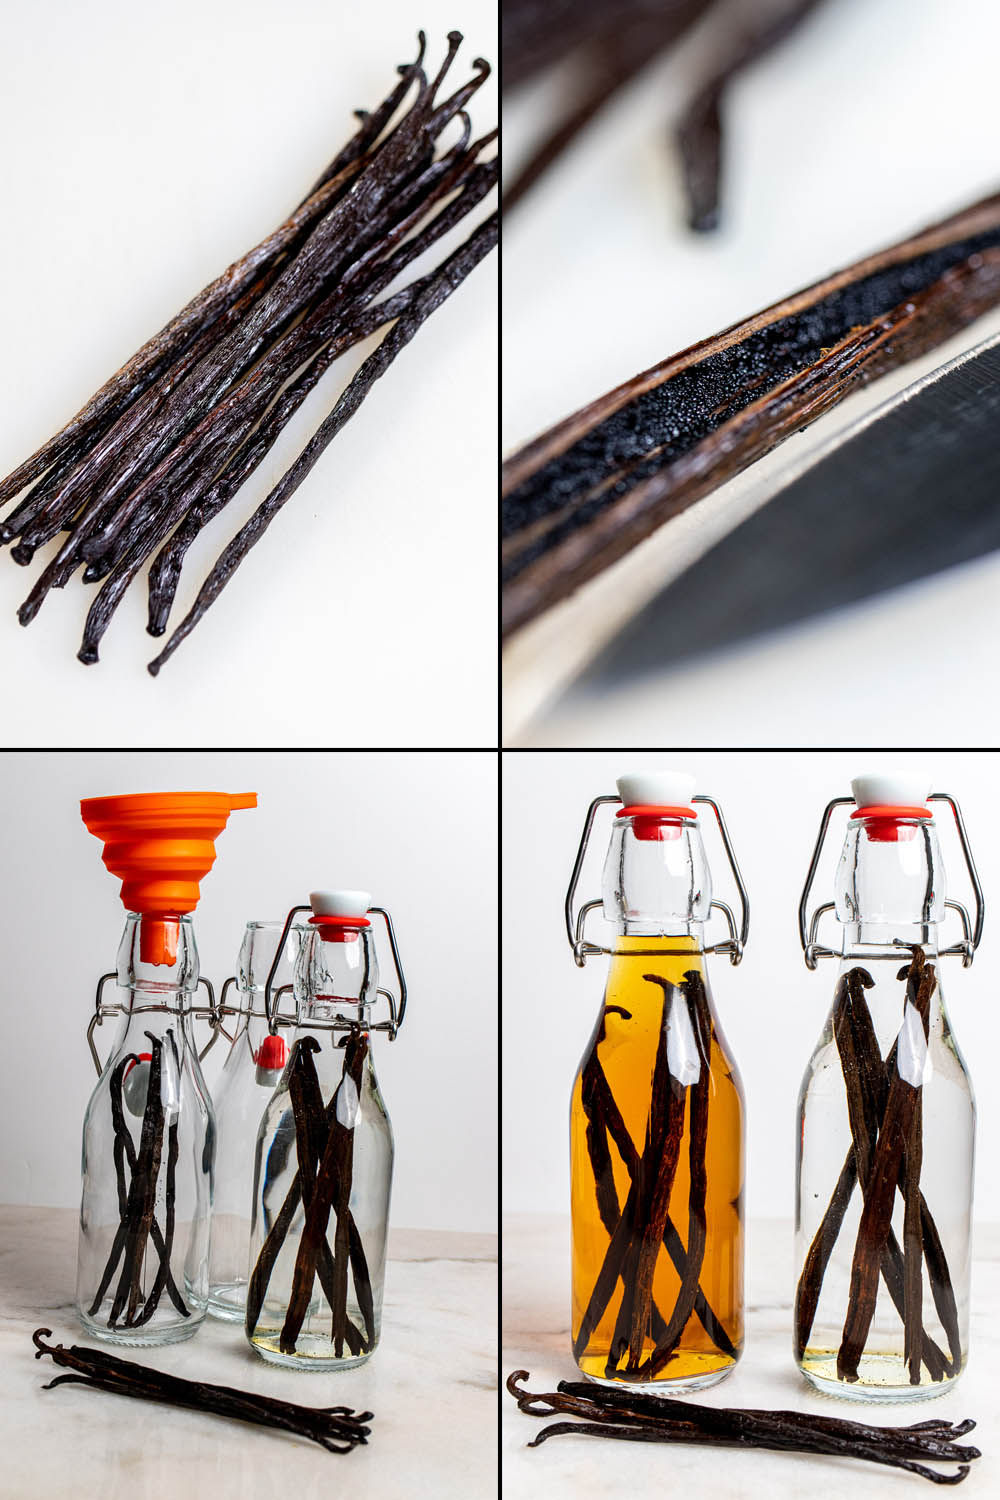 4 steps in making homemade vanilla extract